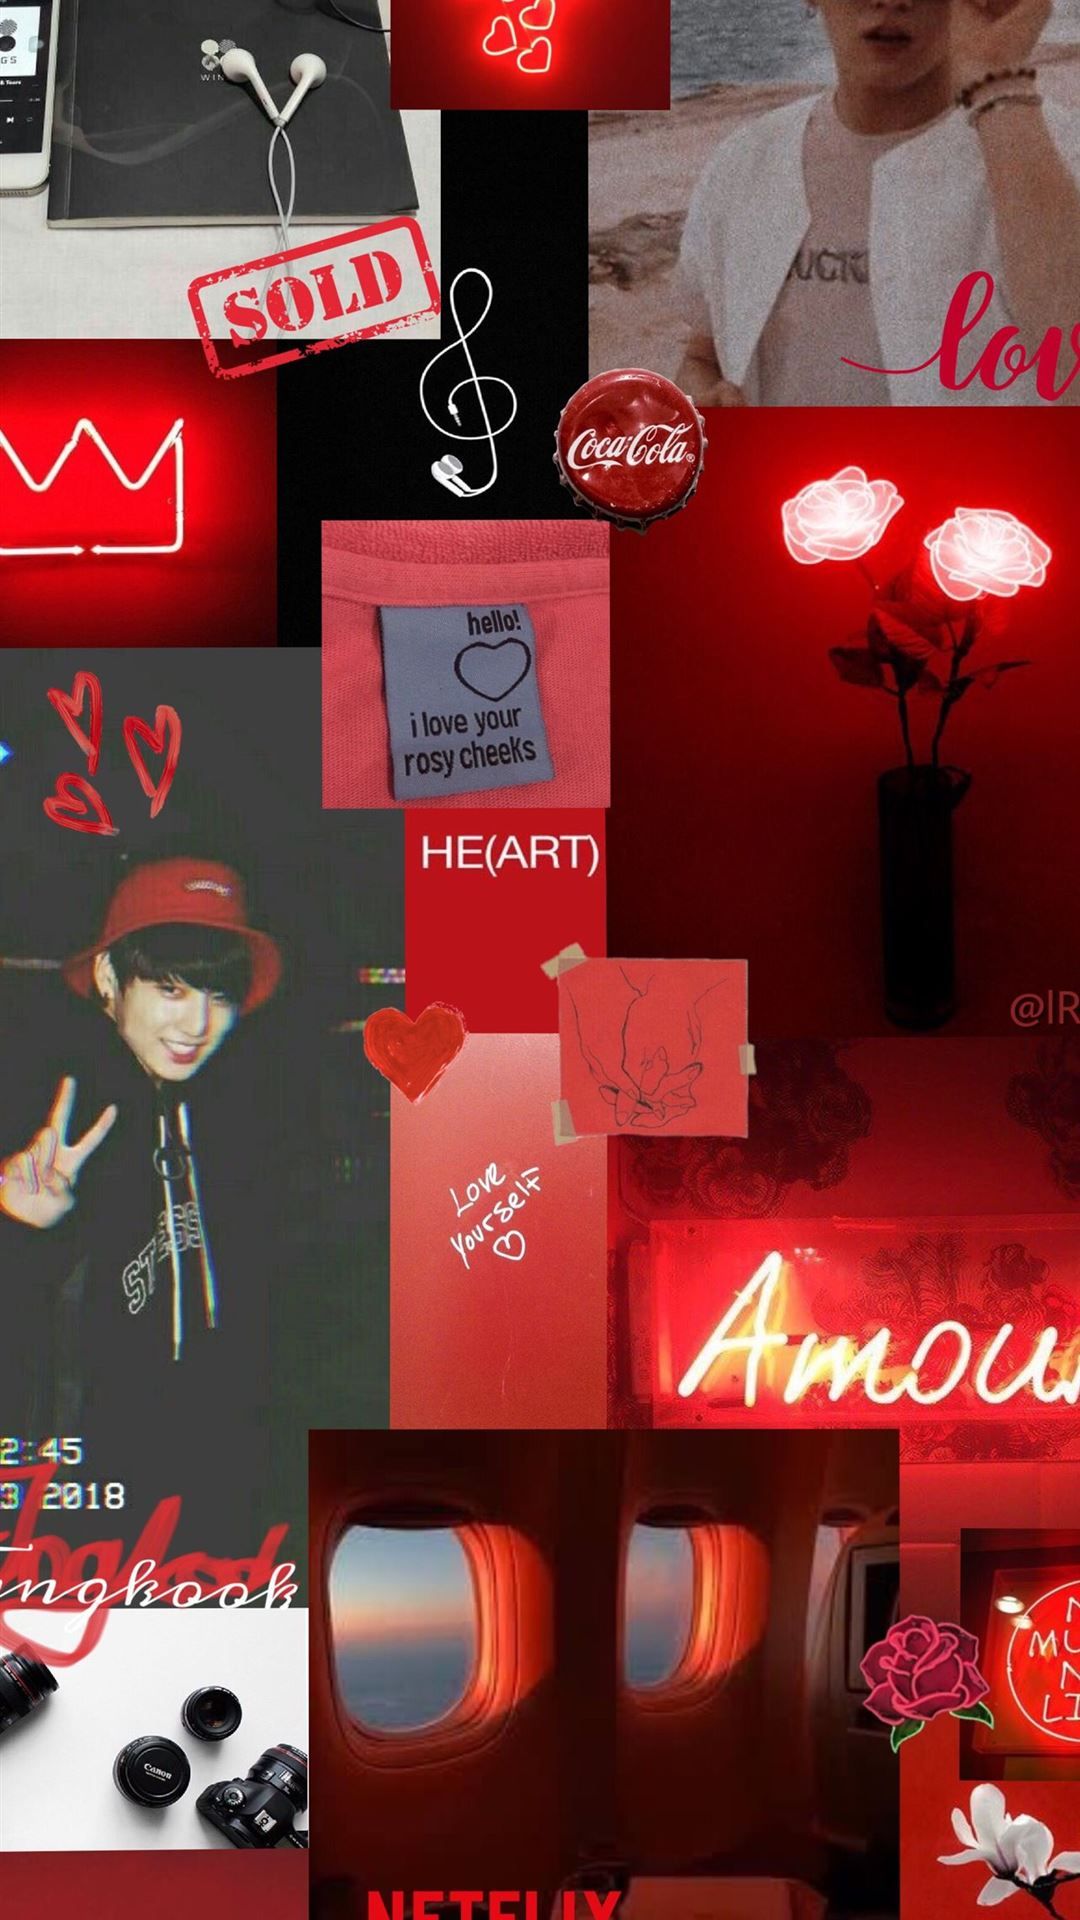 Red aesthetic wallpaper for phone and desktop with BTS, Netflix, Coca Cola, and Amor. - IPhone red